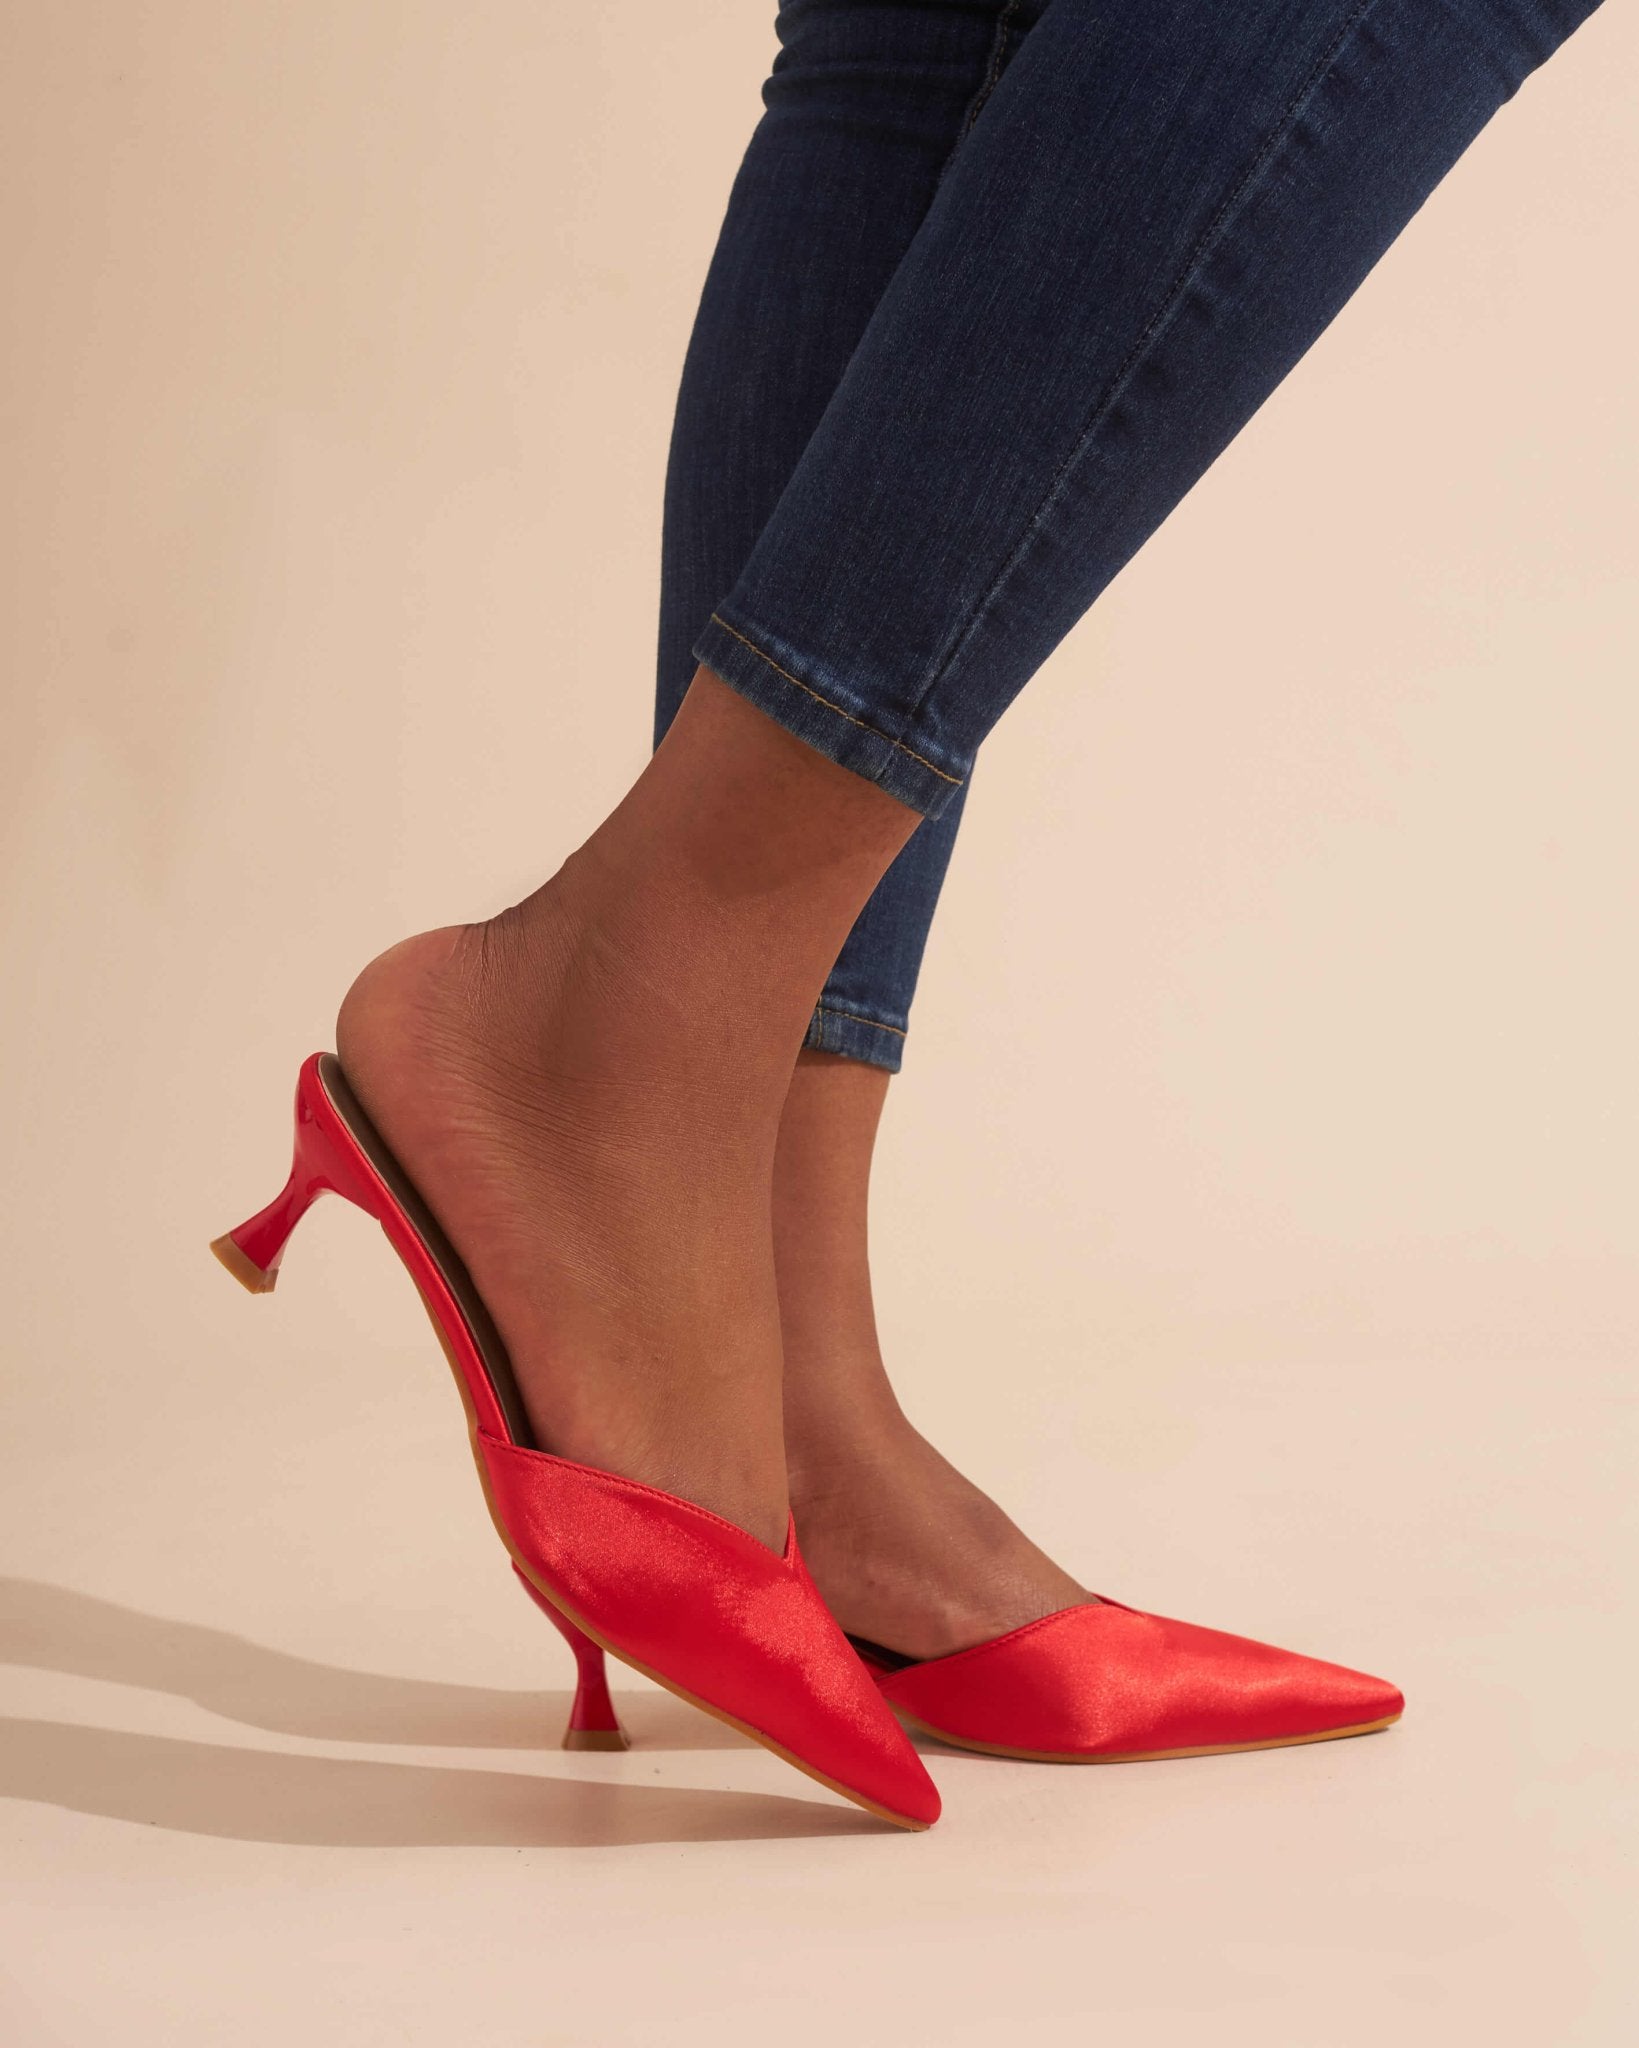 RUBY MULE IN RED - Outlash brand